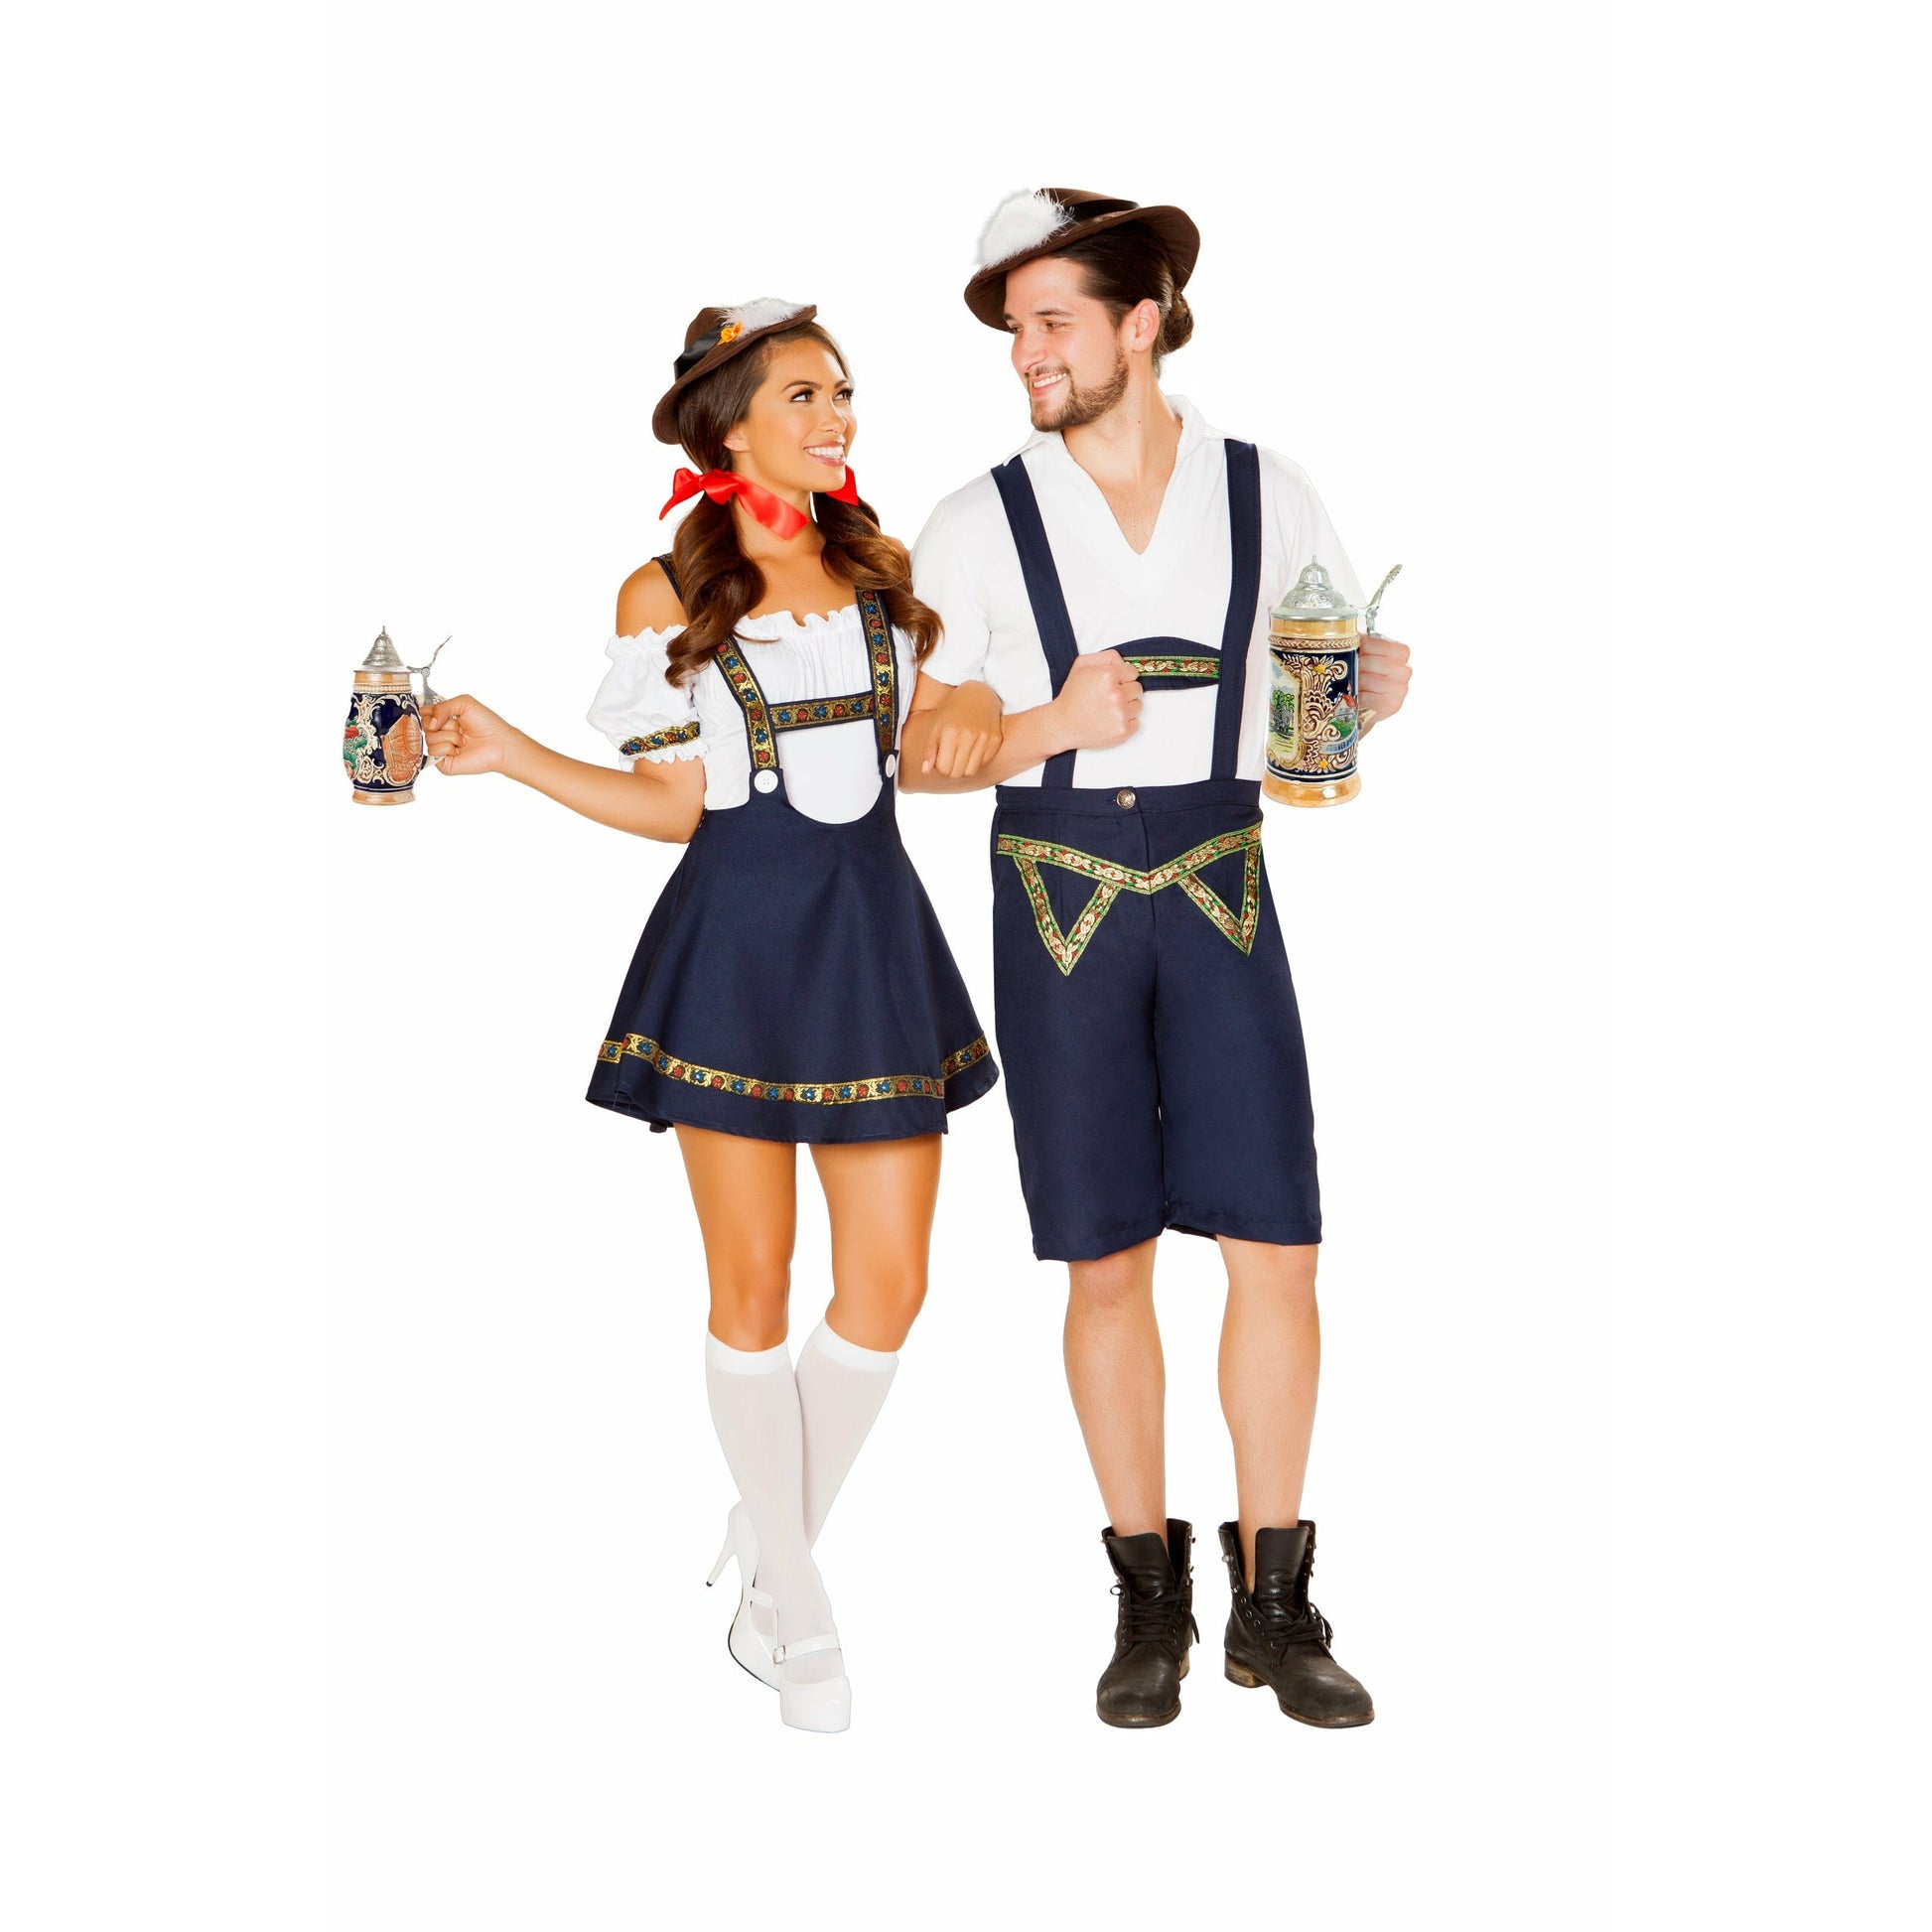 4884 - Roma Costume 3pc Bavarian Beauty Serving Wench Couples Costume